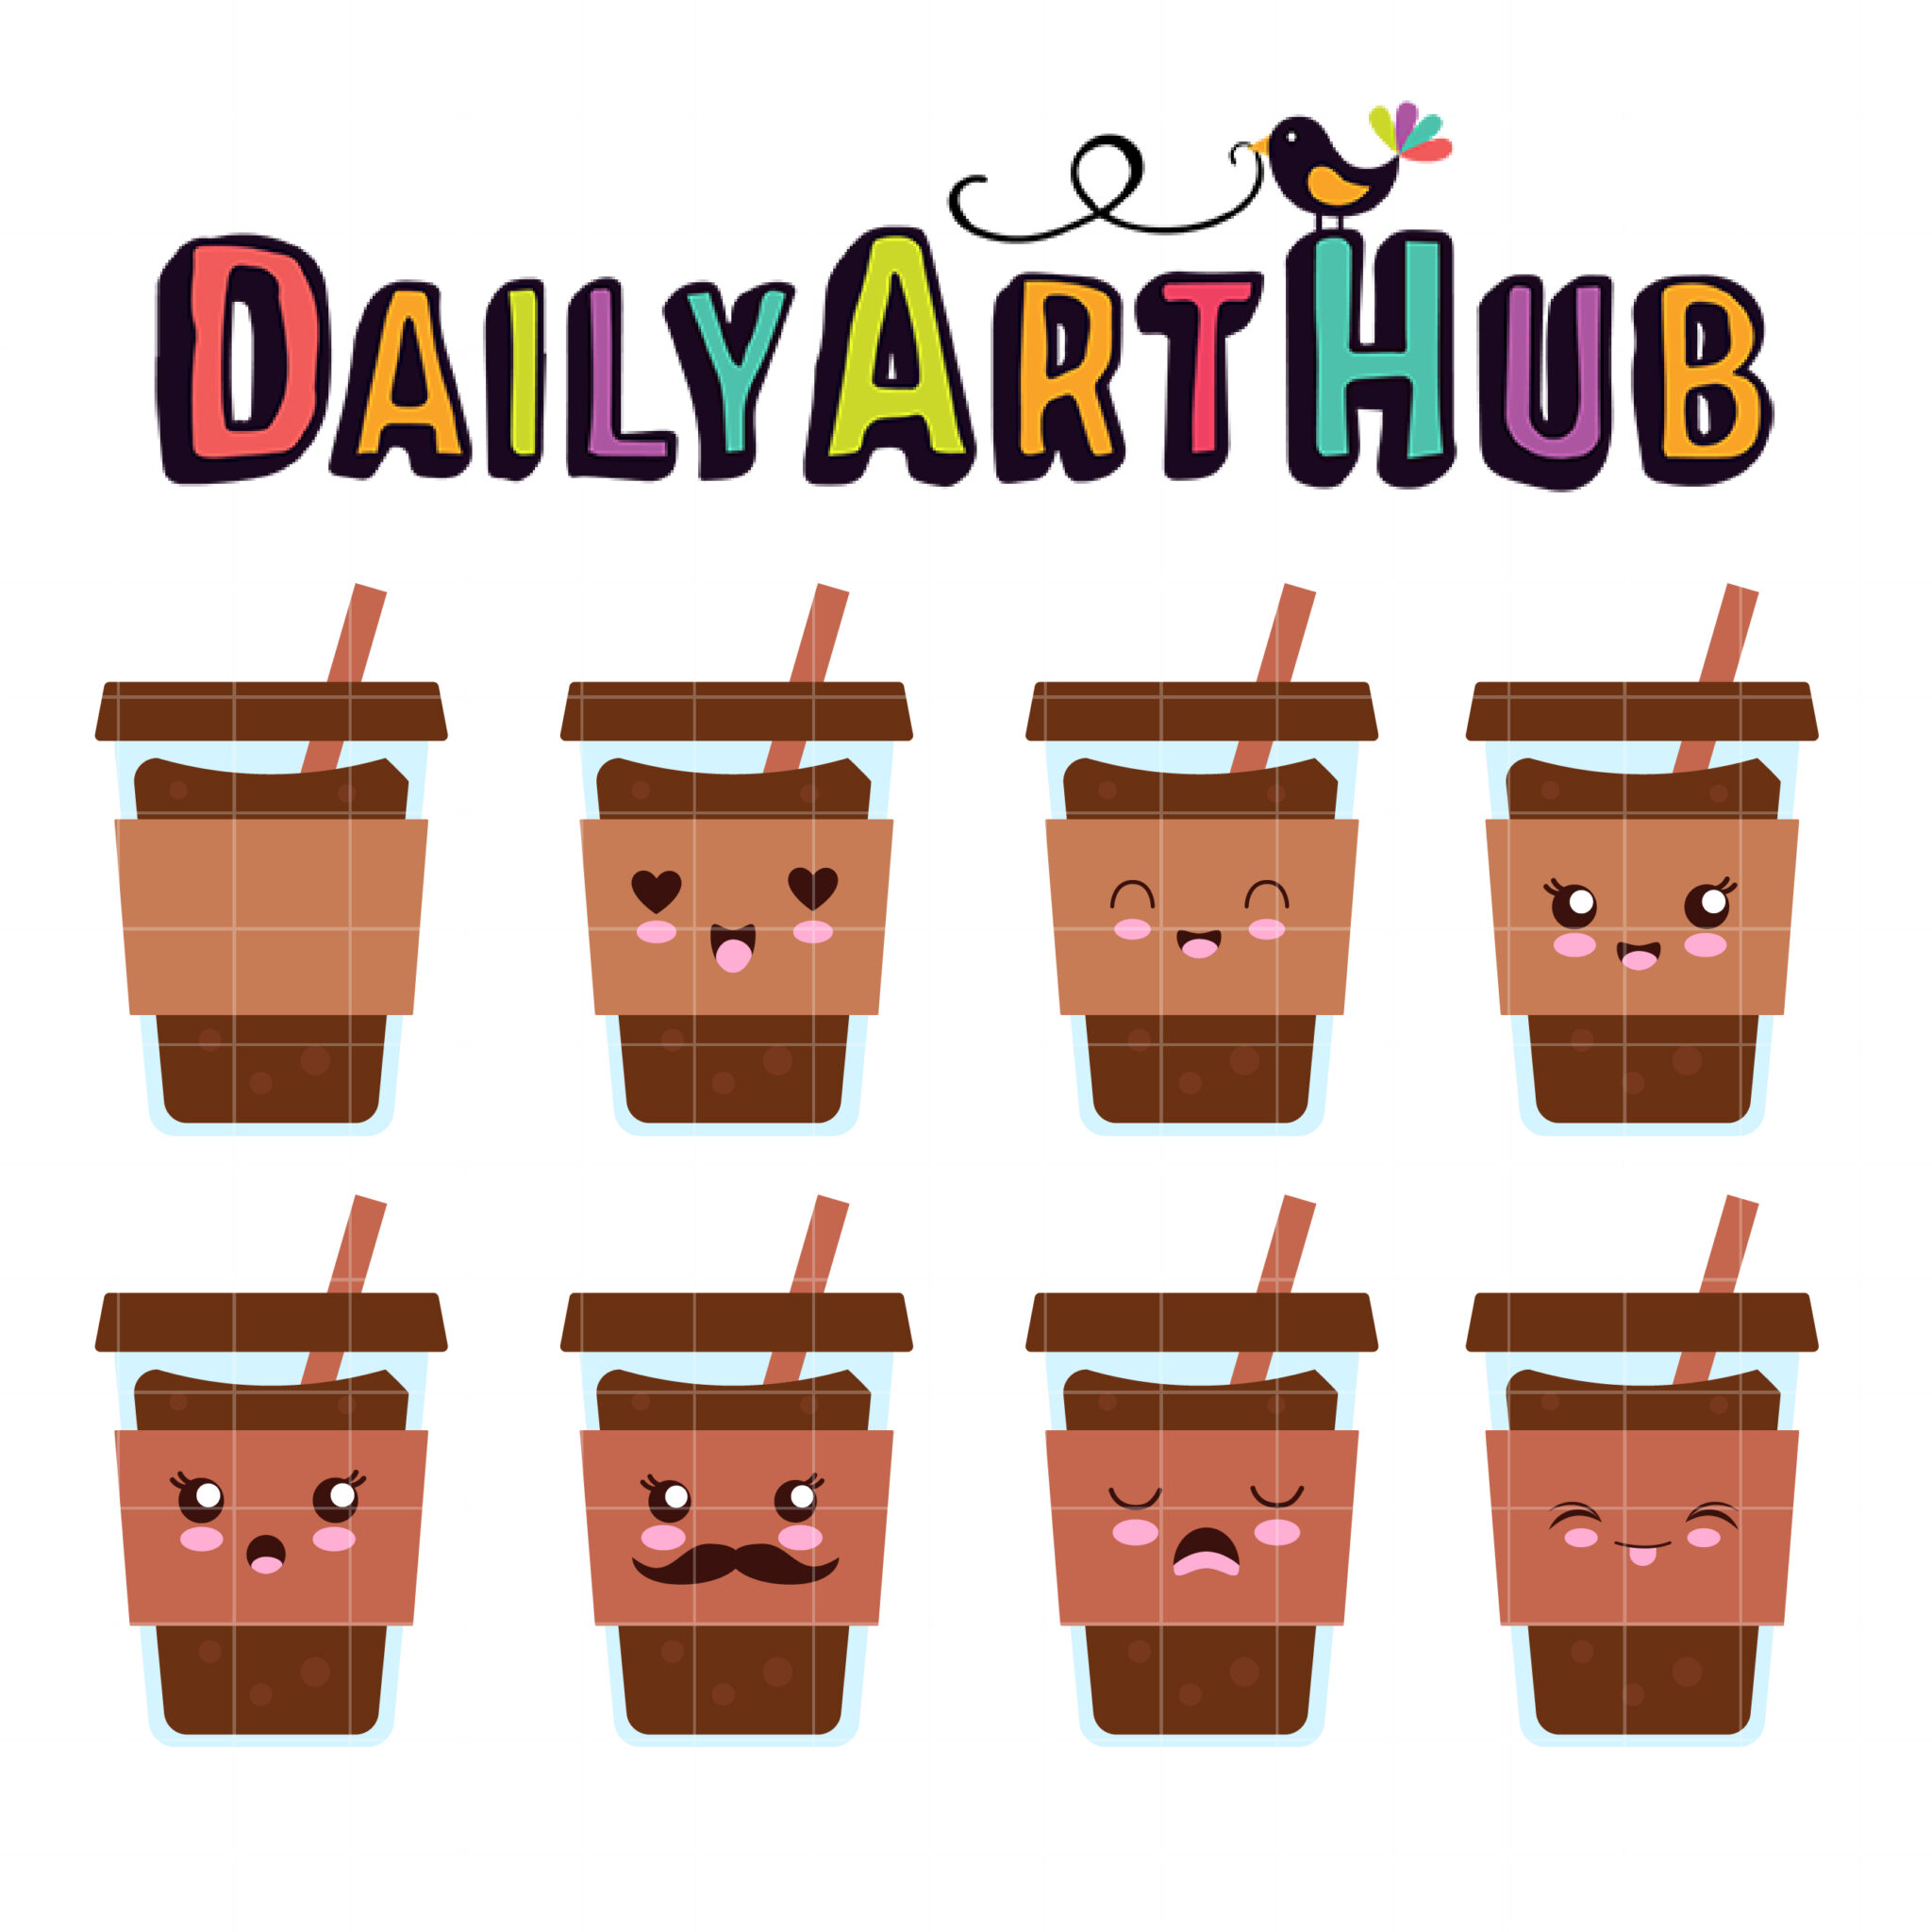 https://www.dailyarthub.com/wp-content/uploads/2022/07/Cute-Iced-Coffee-Expressions-scaled.jpg